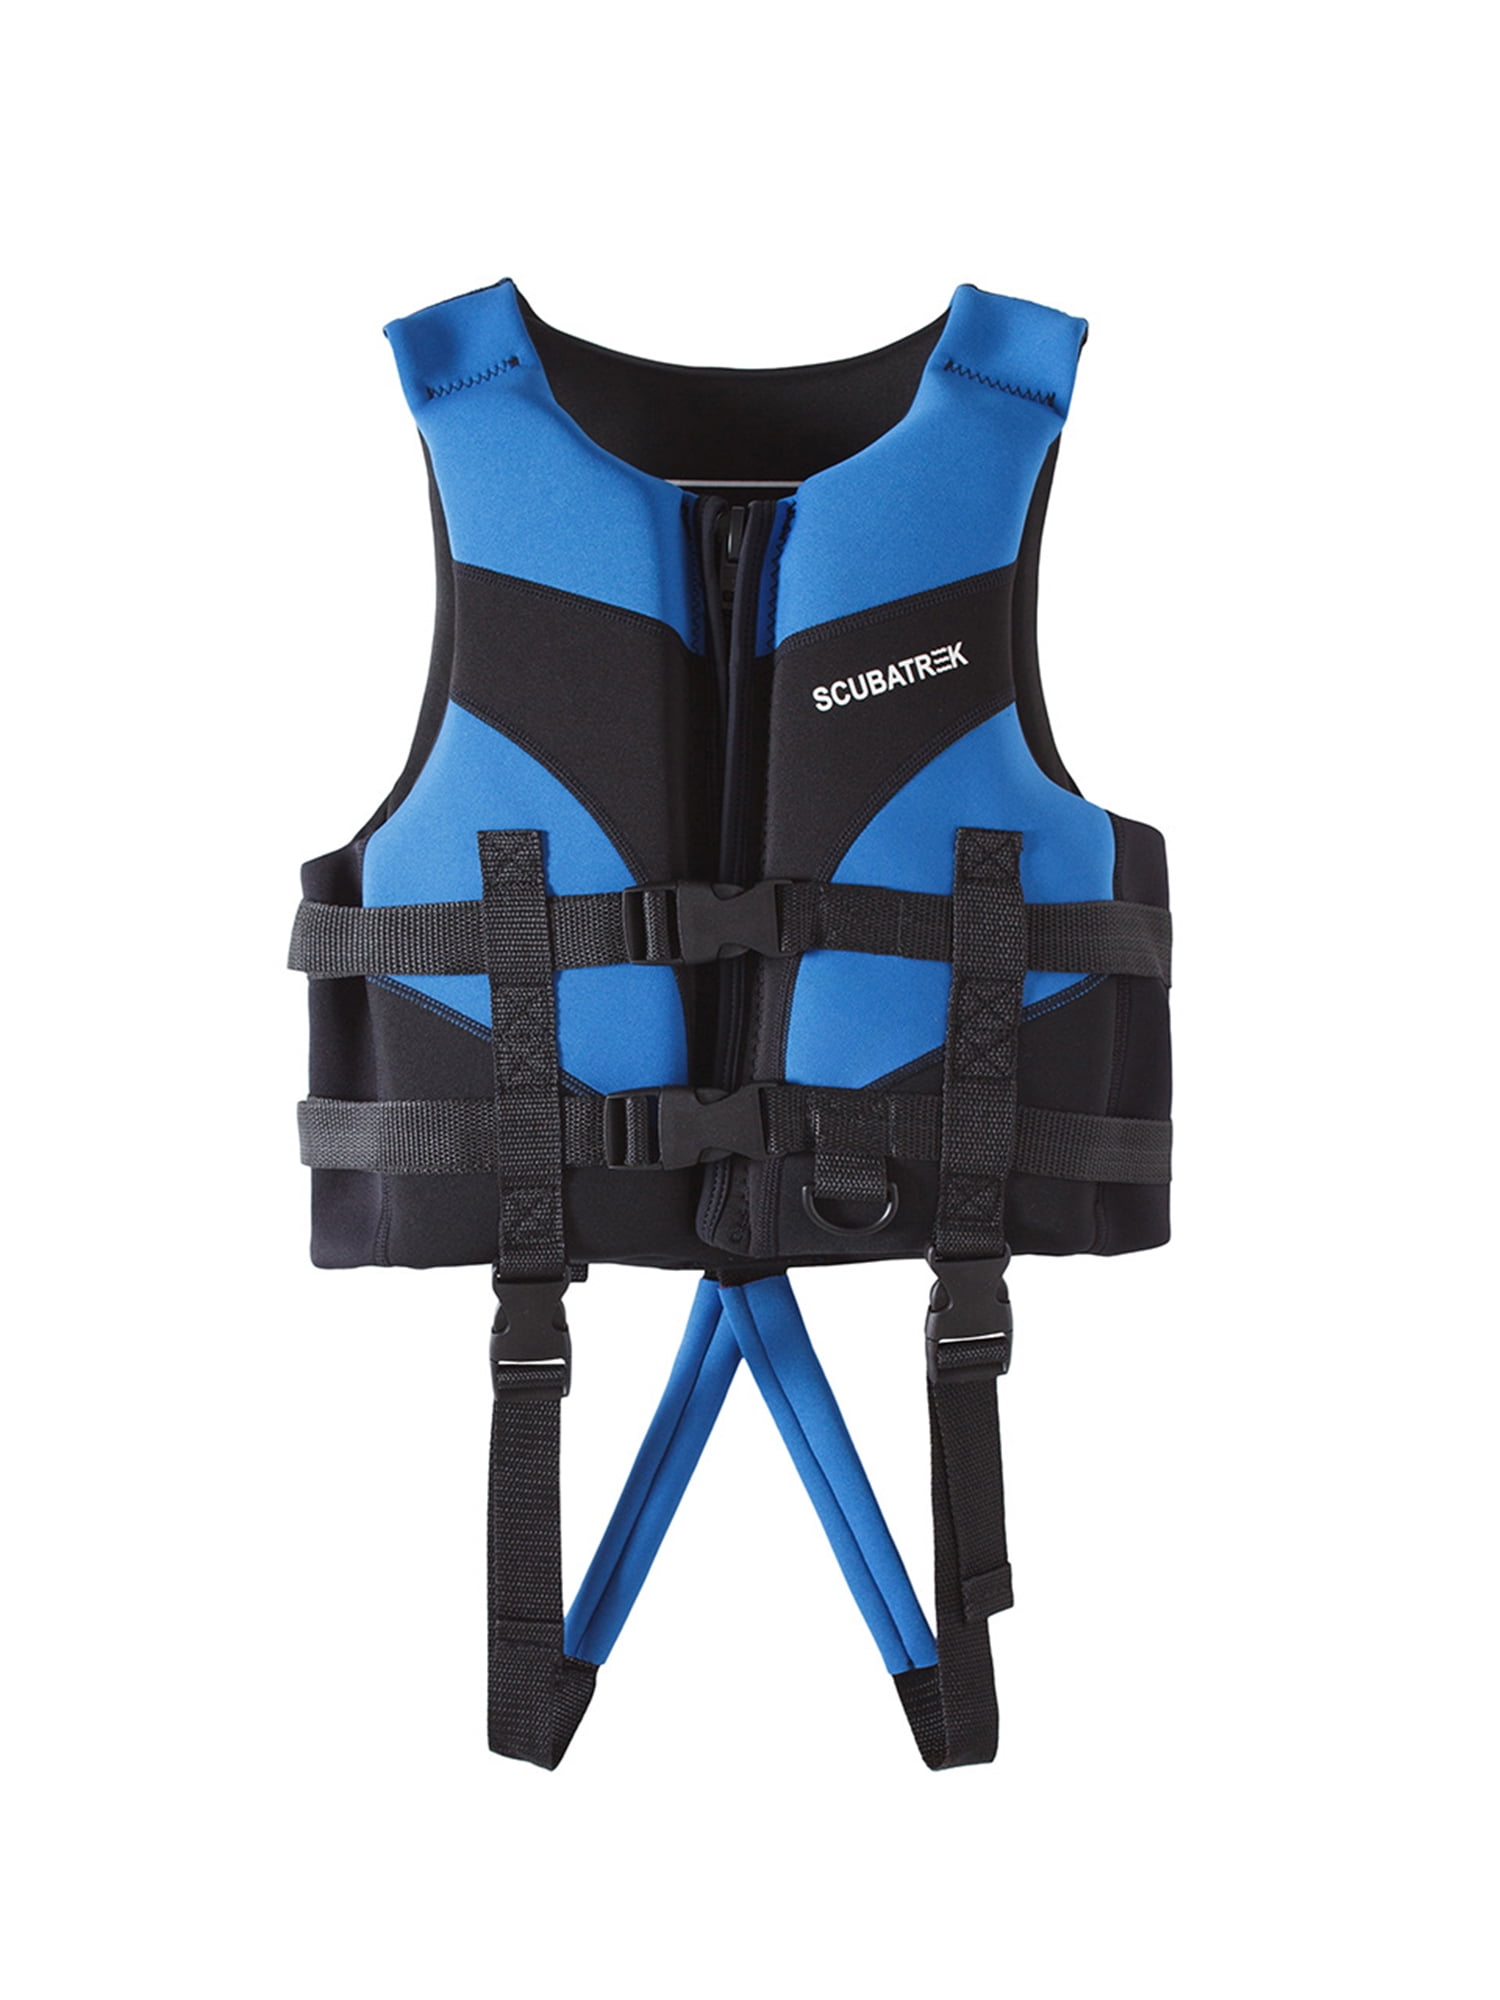 Swim Floatation Vest Swim Trainer Vest with Survival Whistle for Kids 2-12Years Swimming Jacket for Kids